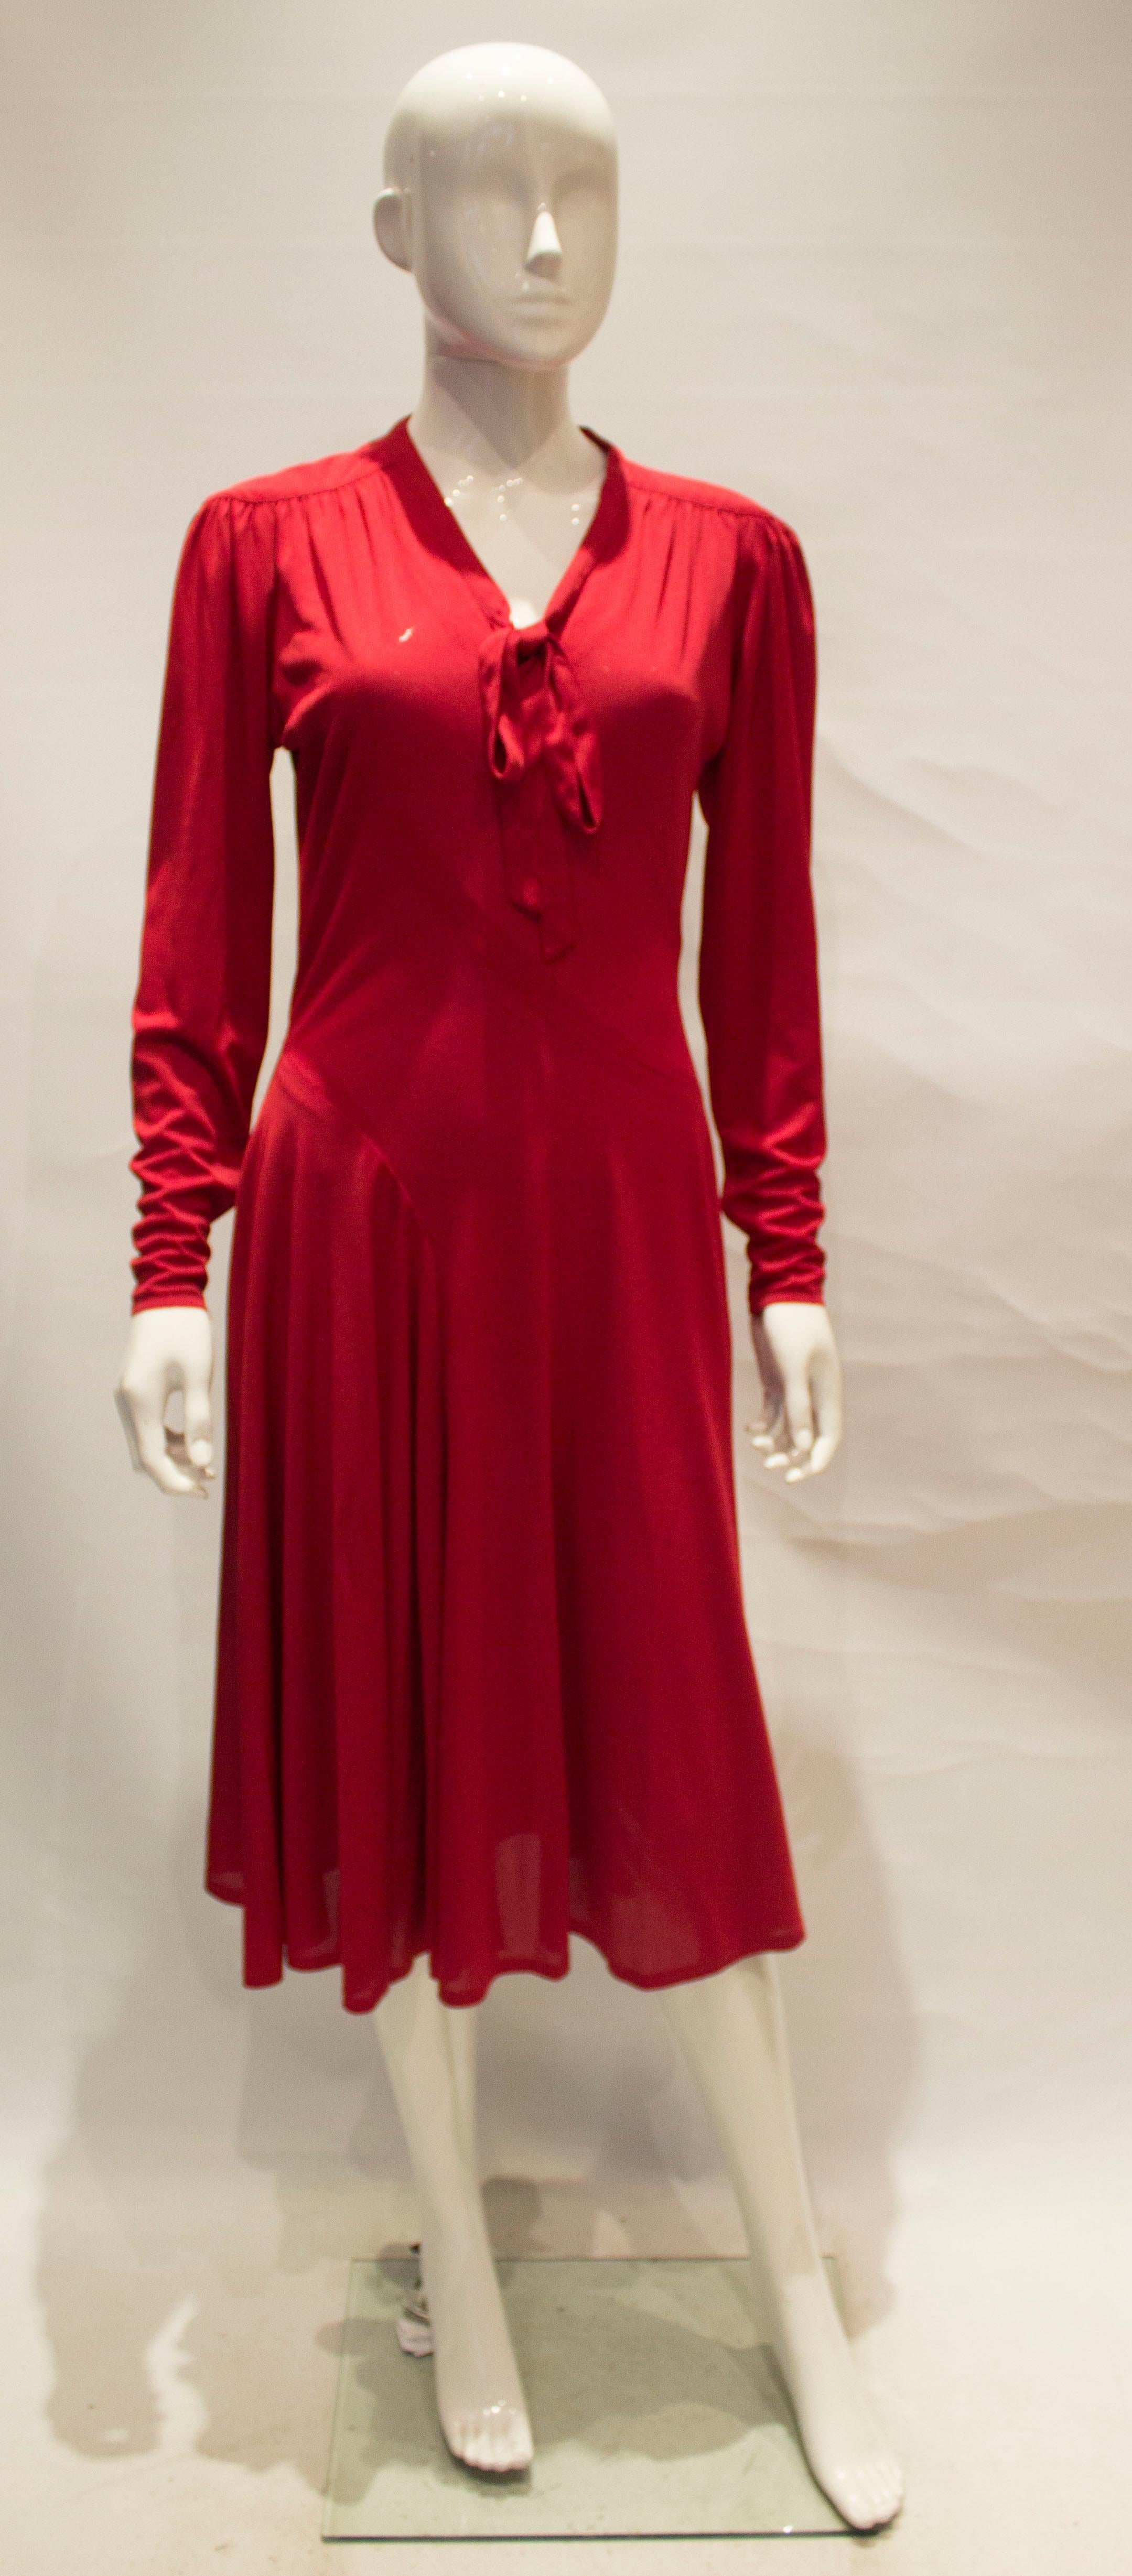 A chic and easy to wear dress from Jerseymasters. In a lovely shade of red  the dress has a v neckline with tie and a self fabric tie belt.